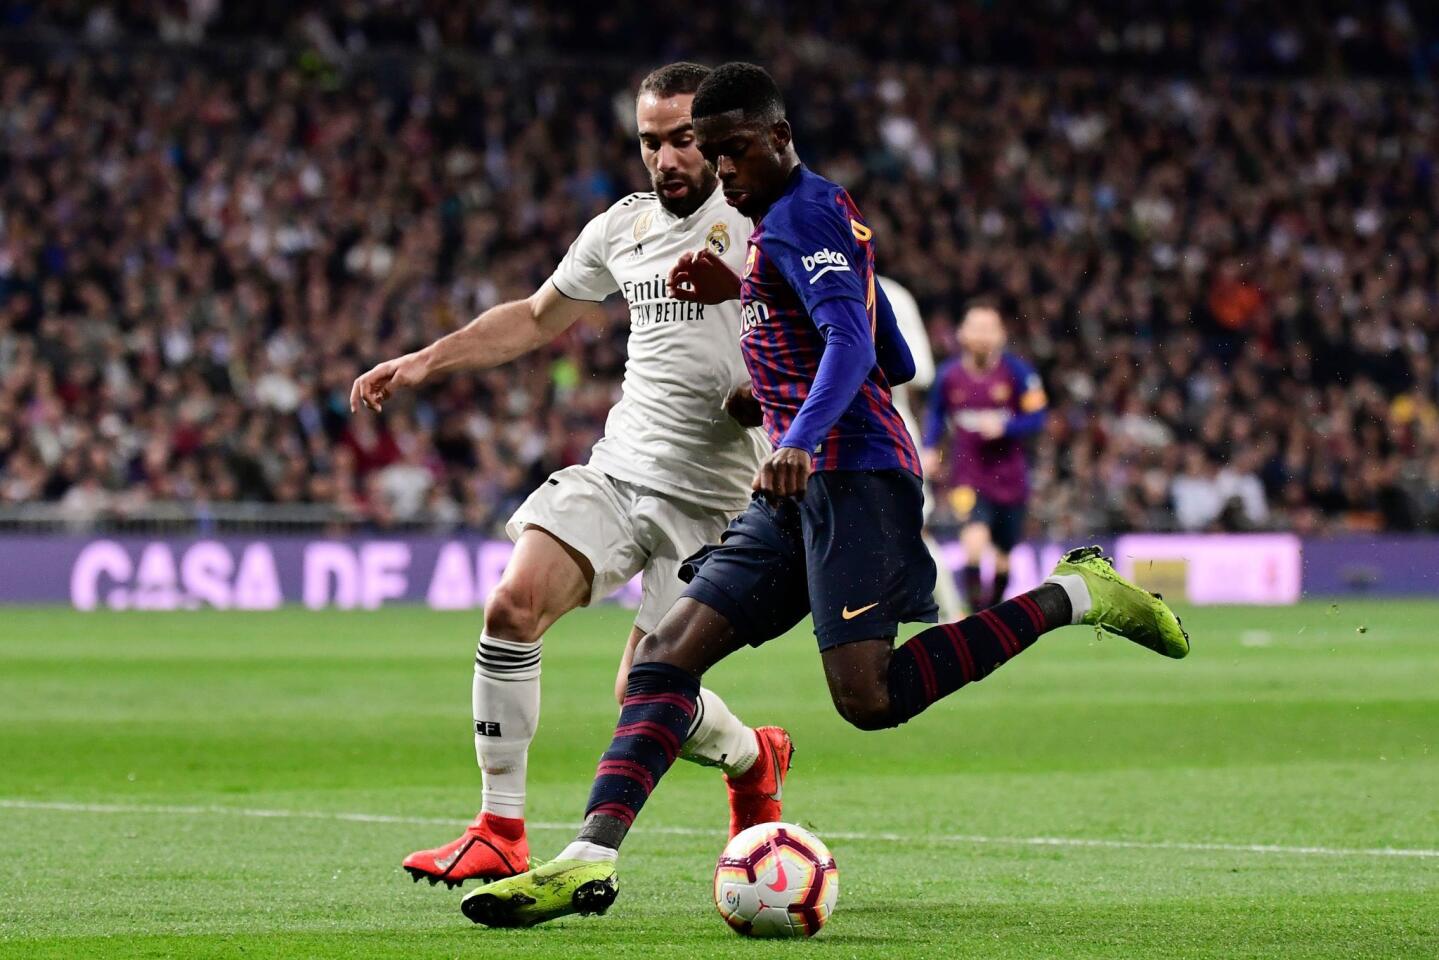 Barcelona's French forward Ousmane Dembele (R) challenges Real Madrid's Spanish defender Dani Carvajal during the Spanish league football match between Real Madrid CF and FC Barcelona at the Santiago Bernabeu stadium in Madrid on March 2, 2019. (Photo by JAVIER SORIANO / AFP)JAVIER SORIANO/AFP/Getty Images ** OUTS - ELSENT, FPG, CM - OUTS * NM, PH, VA if sourced by CT, LA or MoD **